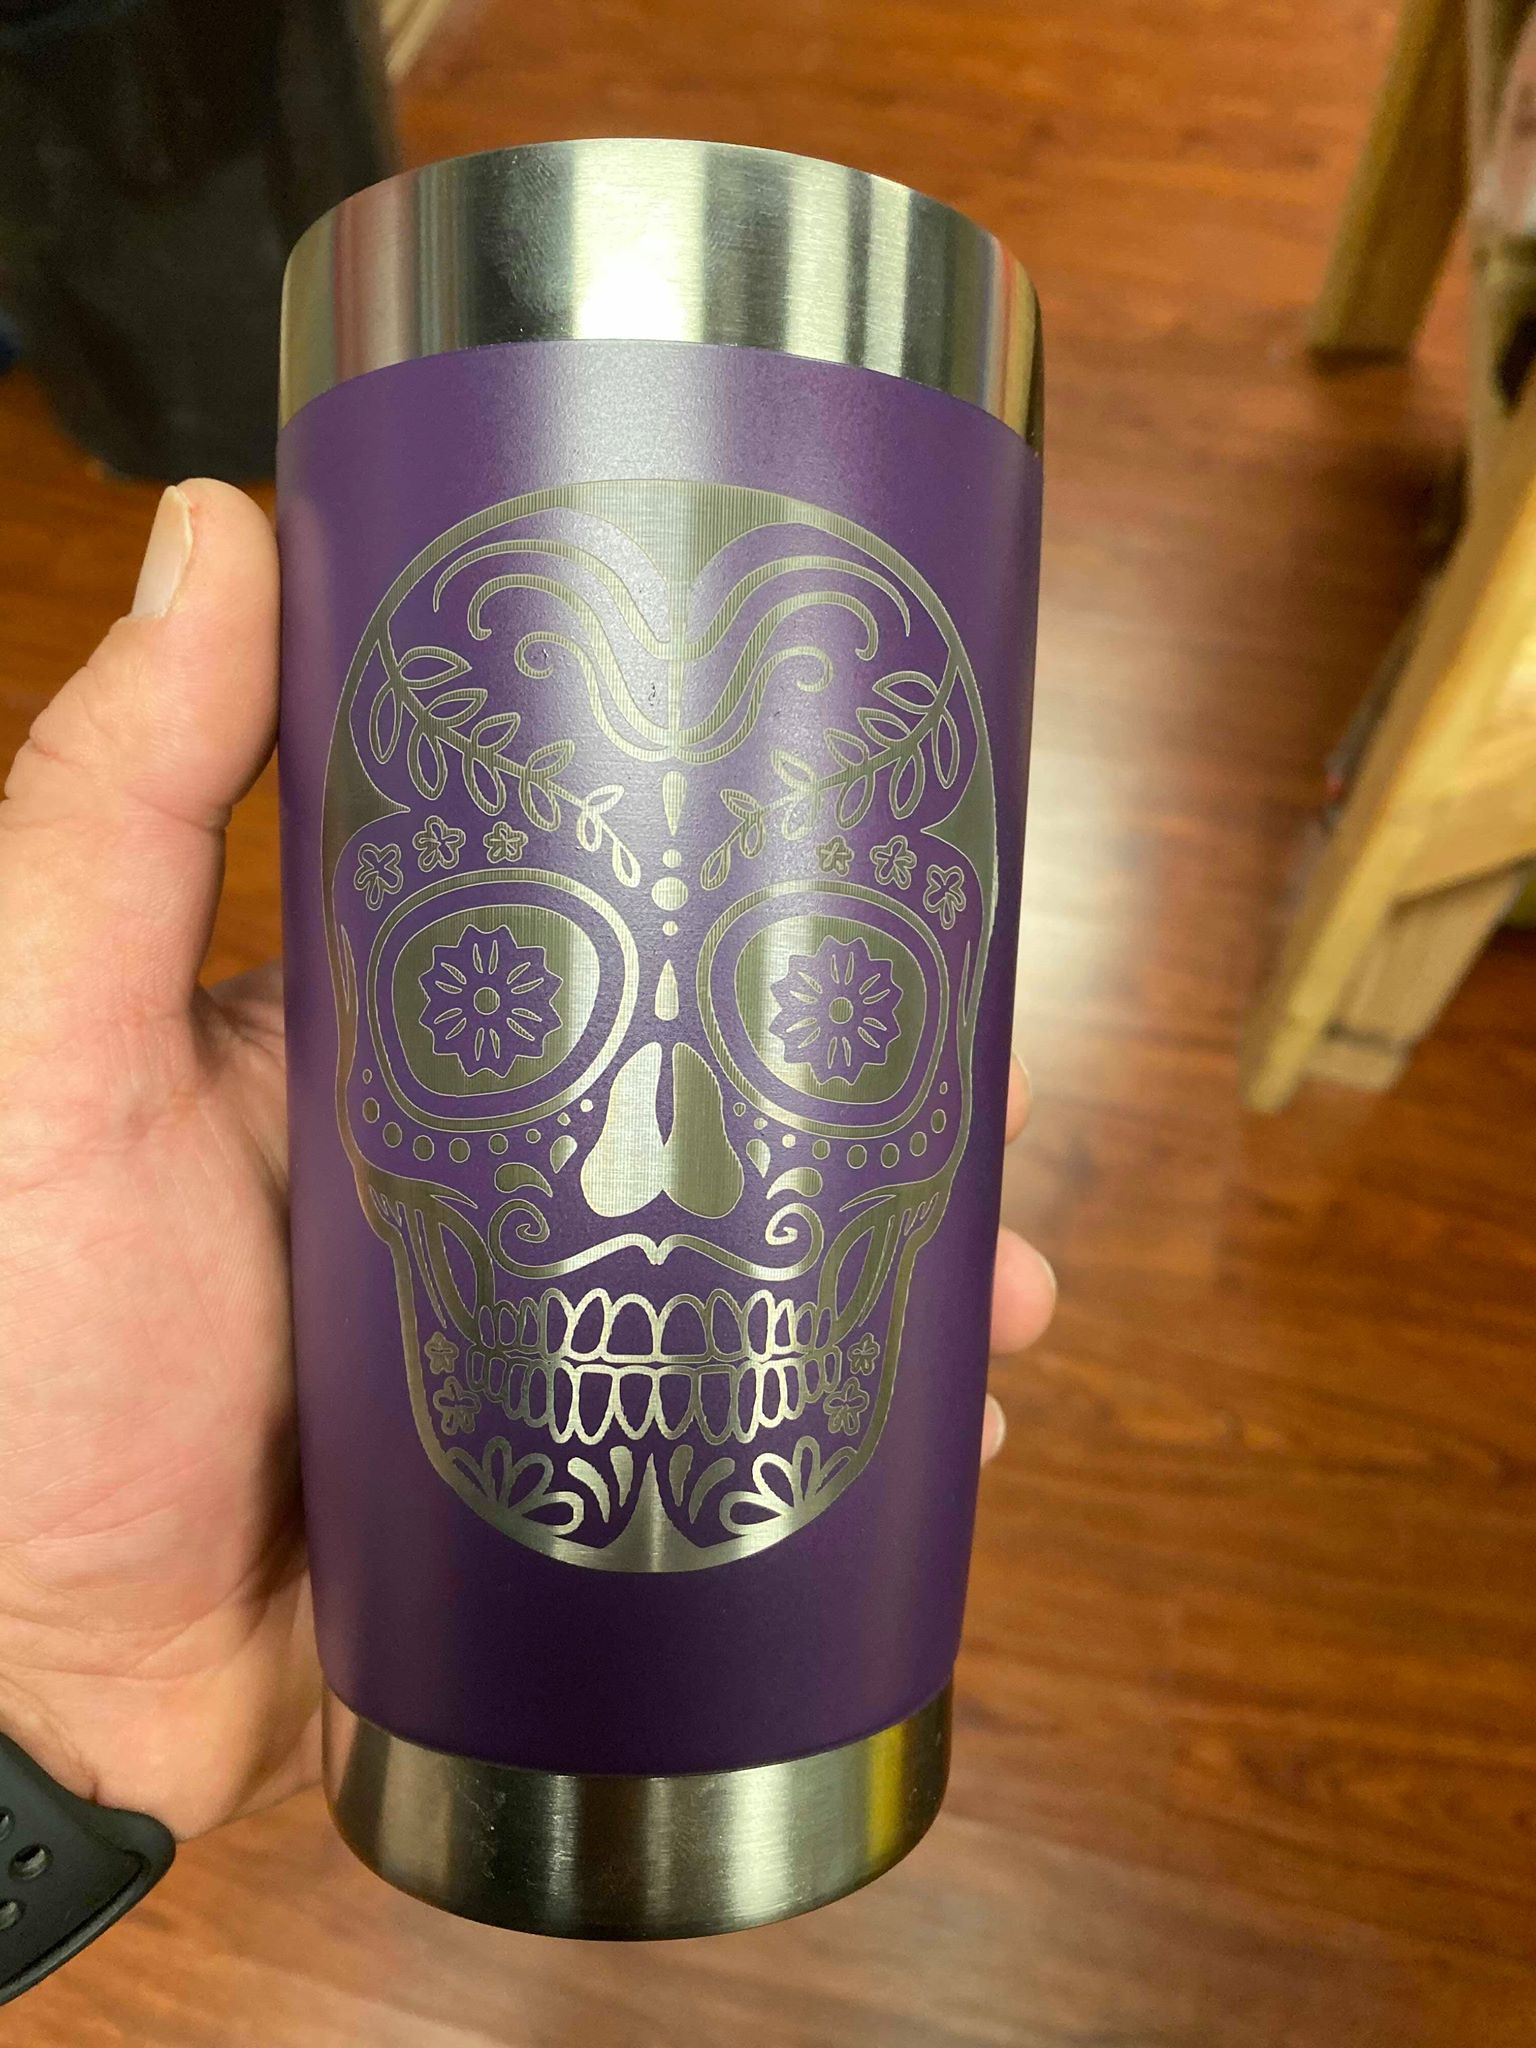 Patel can customize tumblers, bottle openers, jewelry, and anything else a customer might bring in.